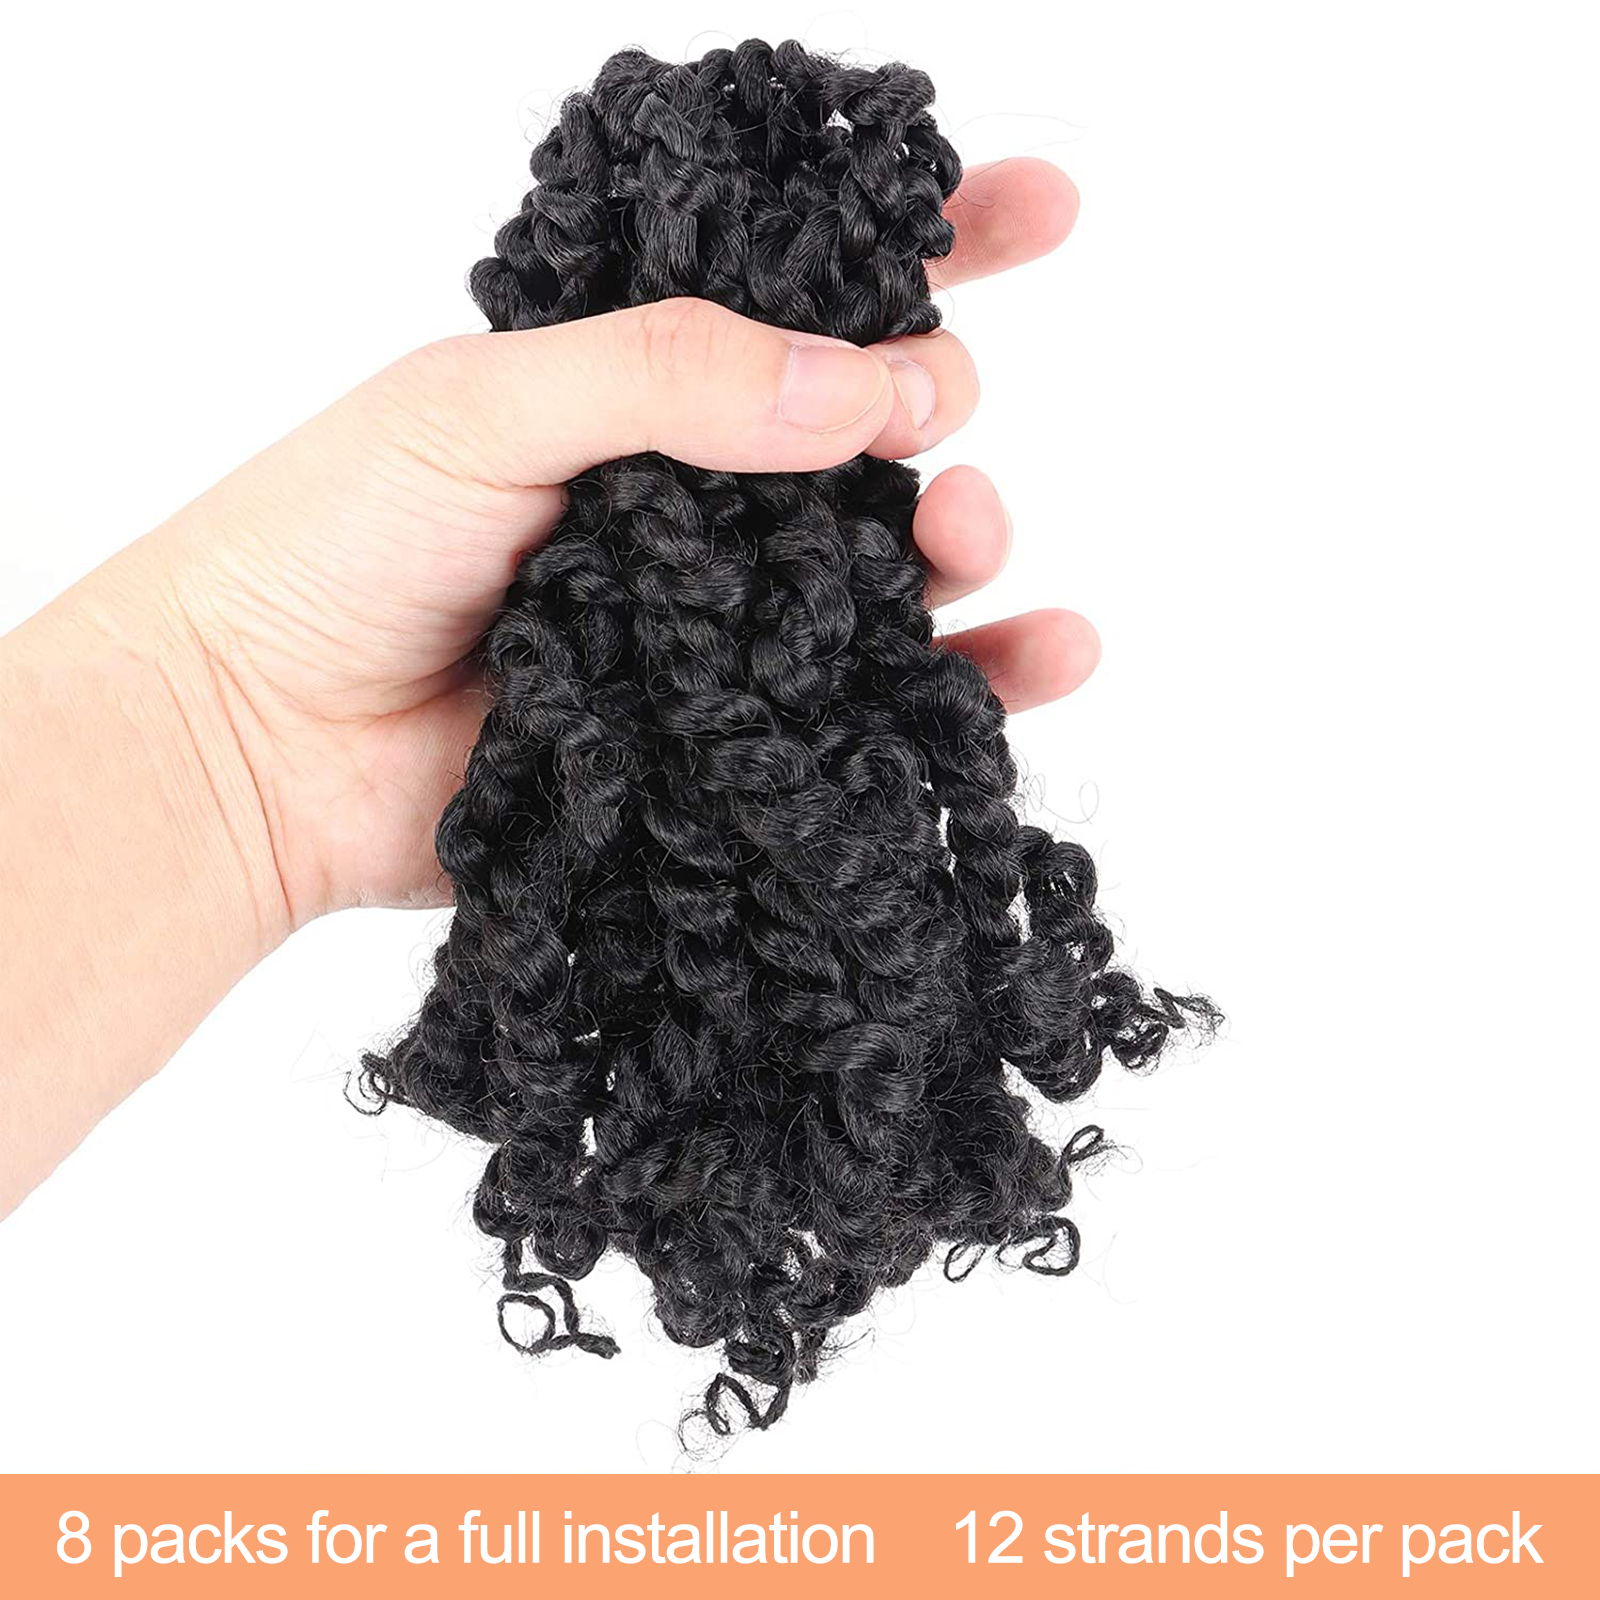 Tiana Passion Twist Hair Pre-Twisted Pre-Looped Passion Twists Crochet Braids Made Of Bohemian Hair Synthetic Braiding Hair Extension - Toyotress